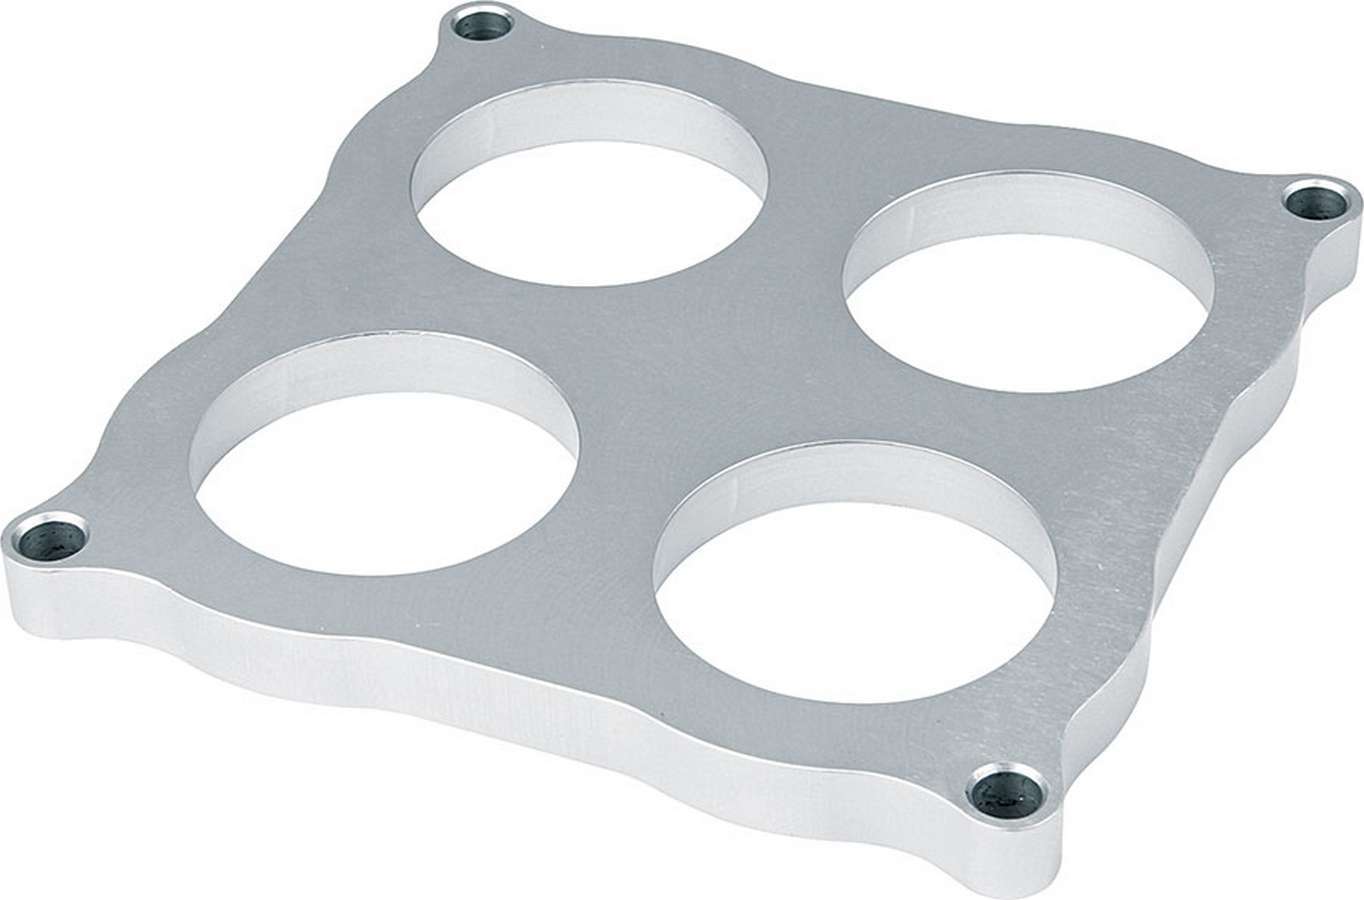 Allstar Performance 25973 Carburetor Shear Plate, 1/2 in Thick, 2-1/8 in Bores, Dominator Flange, Aluminum, Each